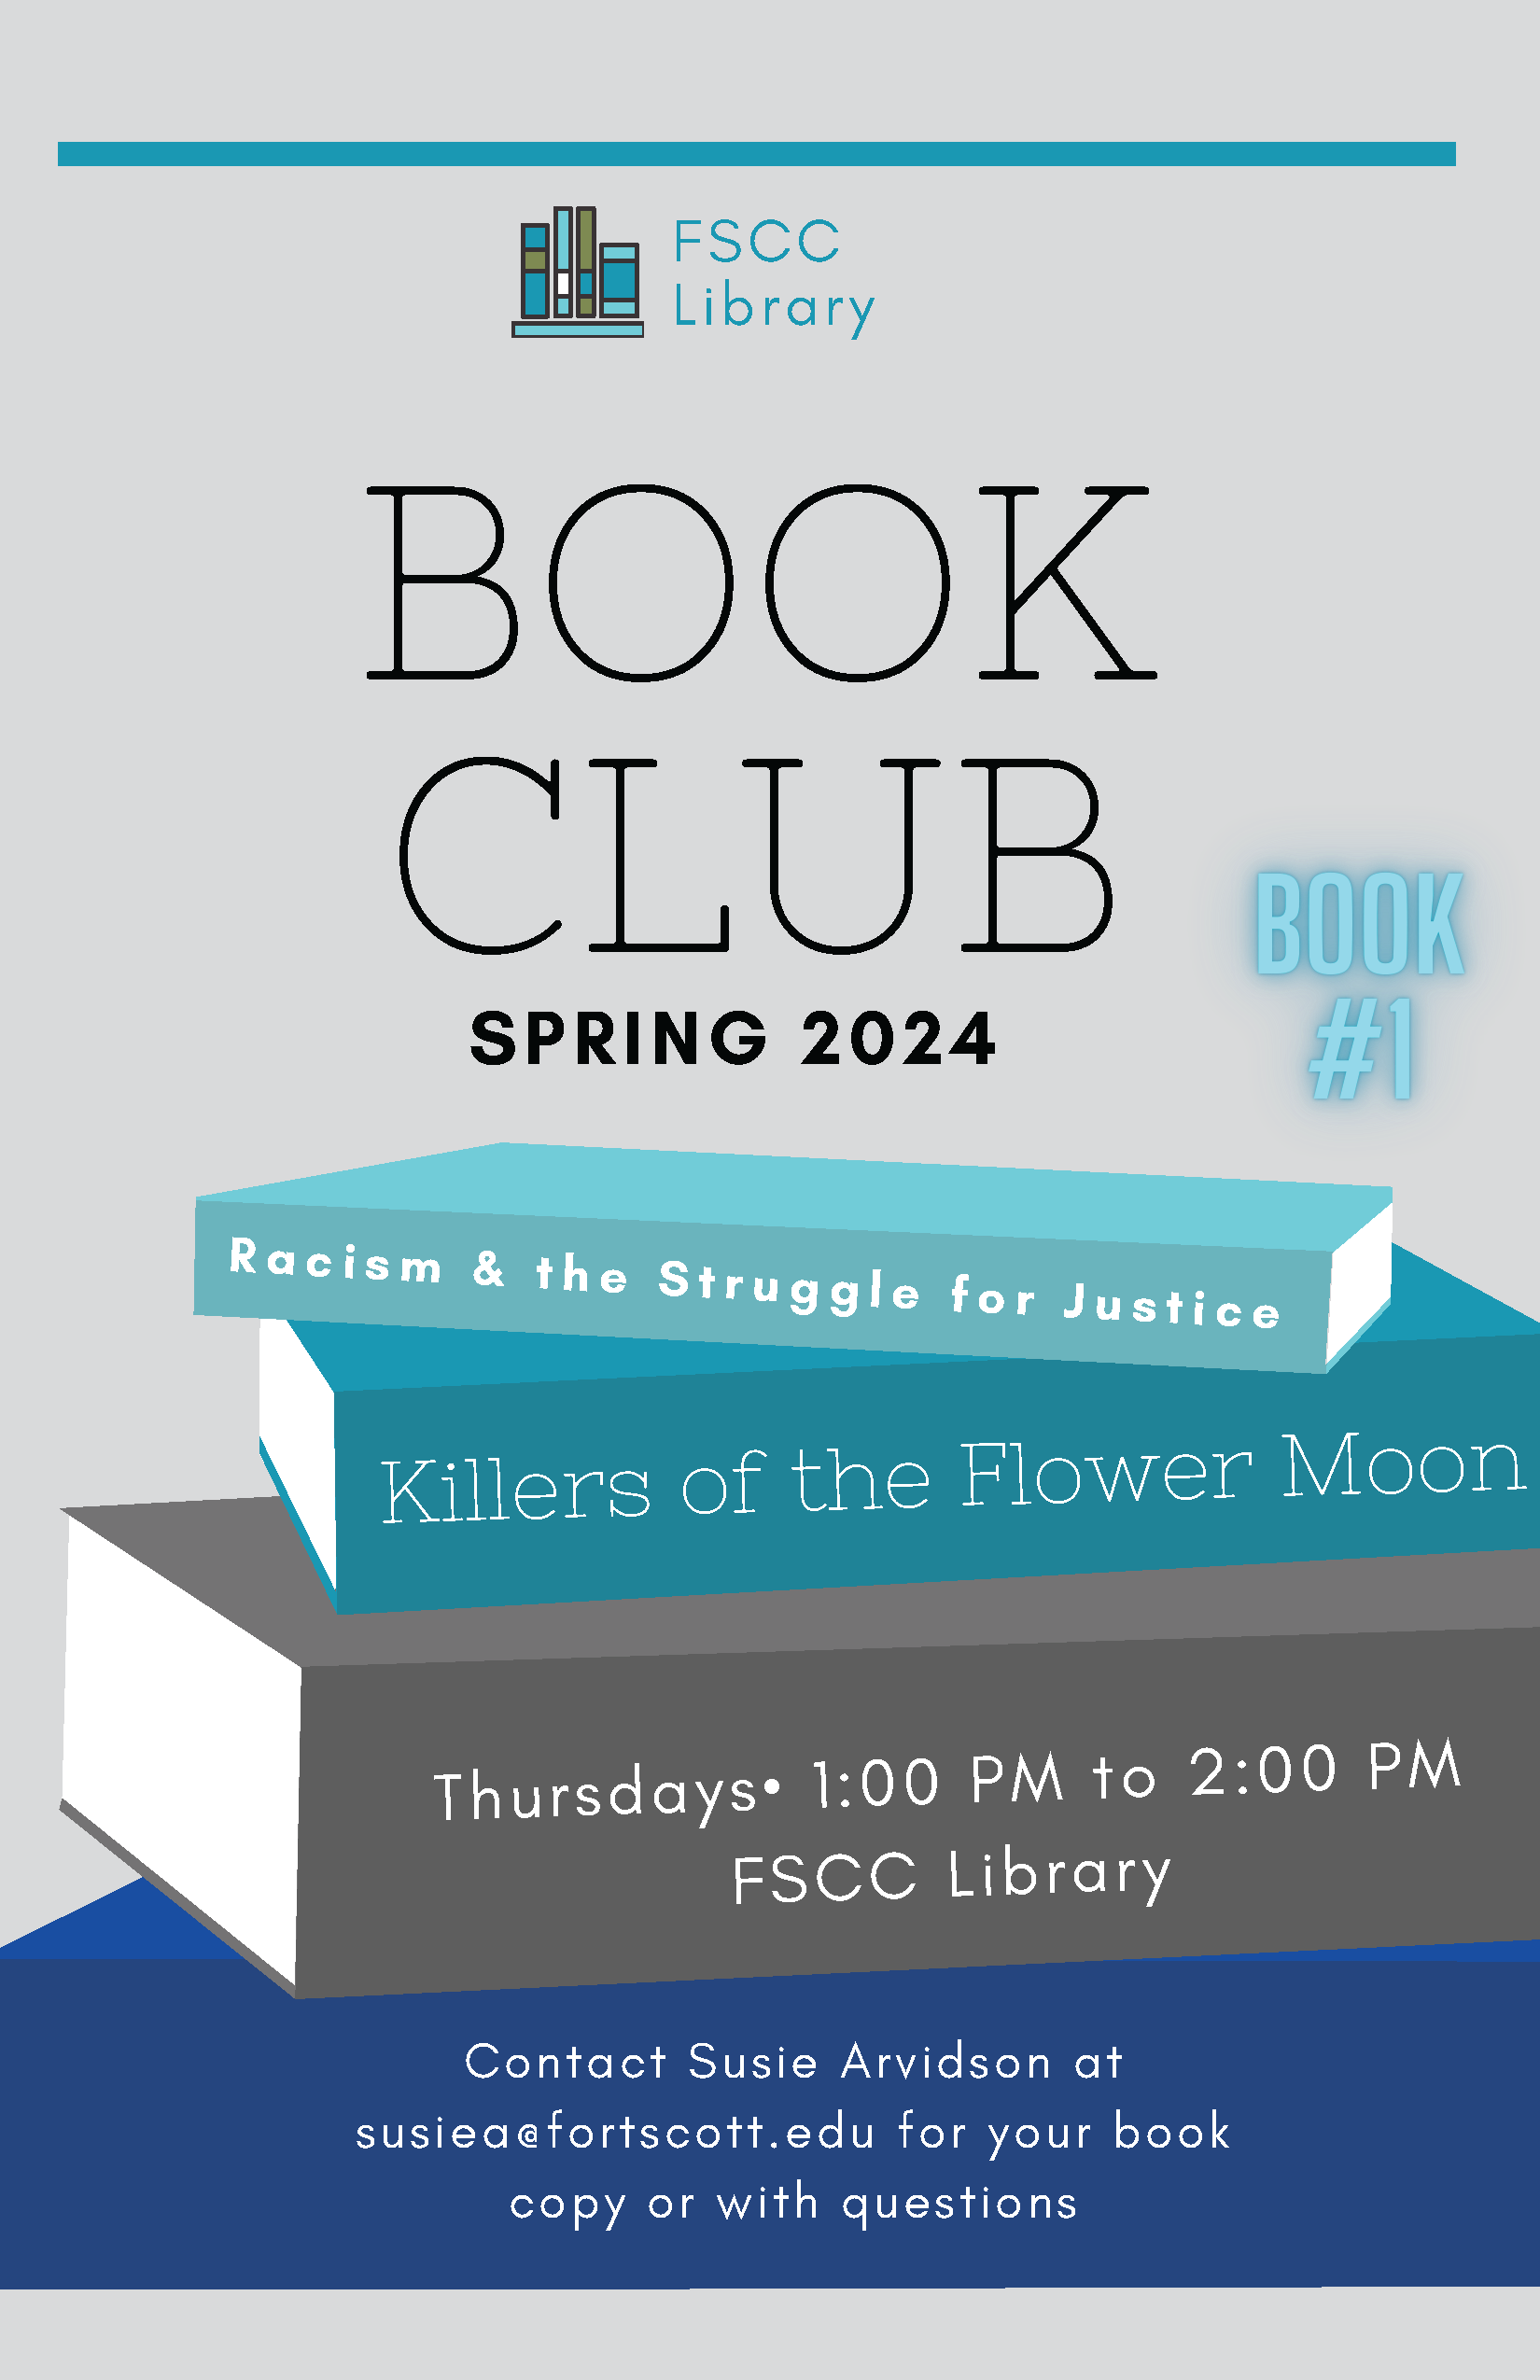 FSCC Library Book Club Spring 2024 Flyer. Books: Flower Moon Racism & the Struggle for Justice & Killers of the Flower Moon. Thursdays • 1:00 PM to 2:00 PMFSCC Library. Contact Susie Arvidson at usiea@fortscott.edu for your book copy or with questions.